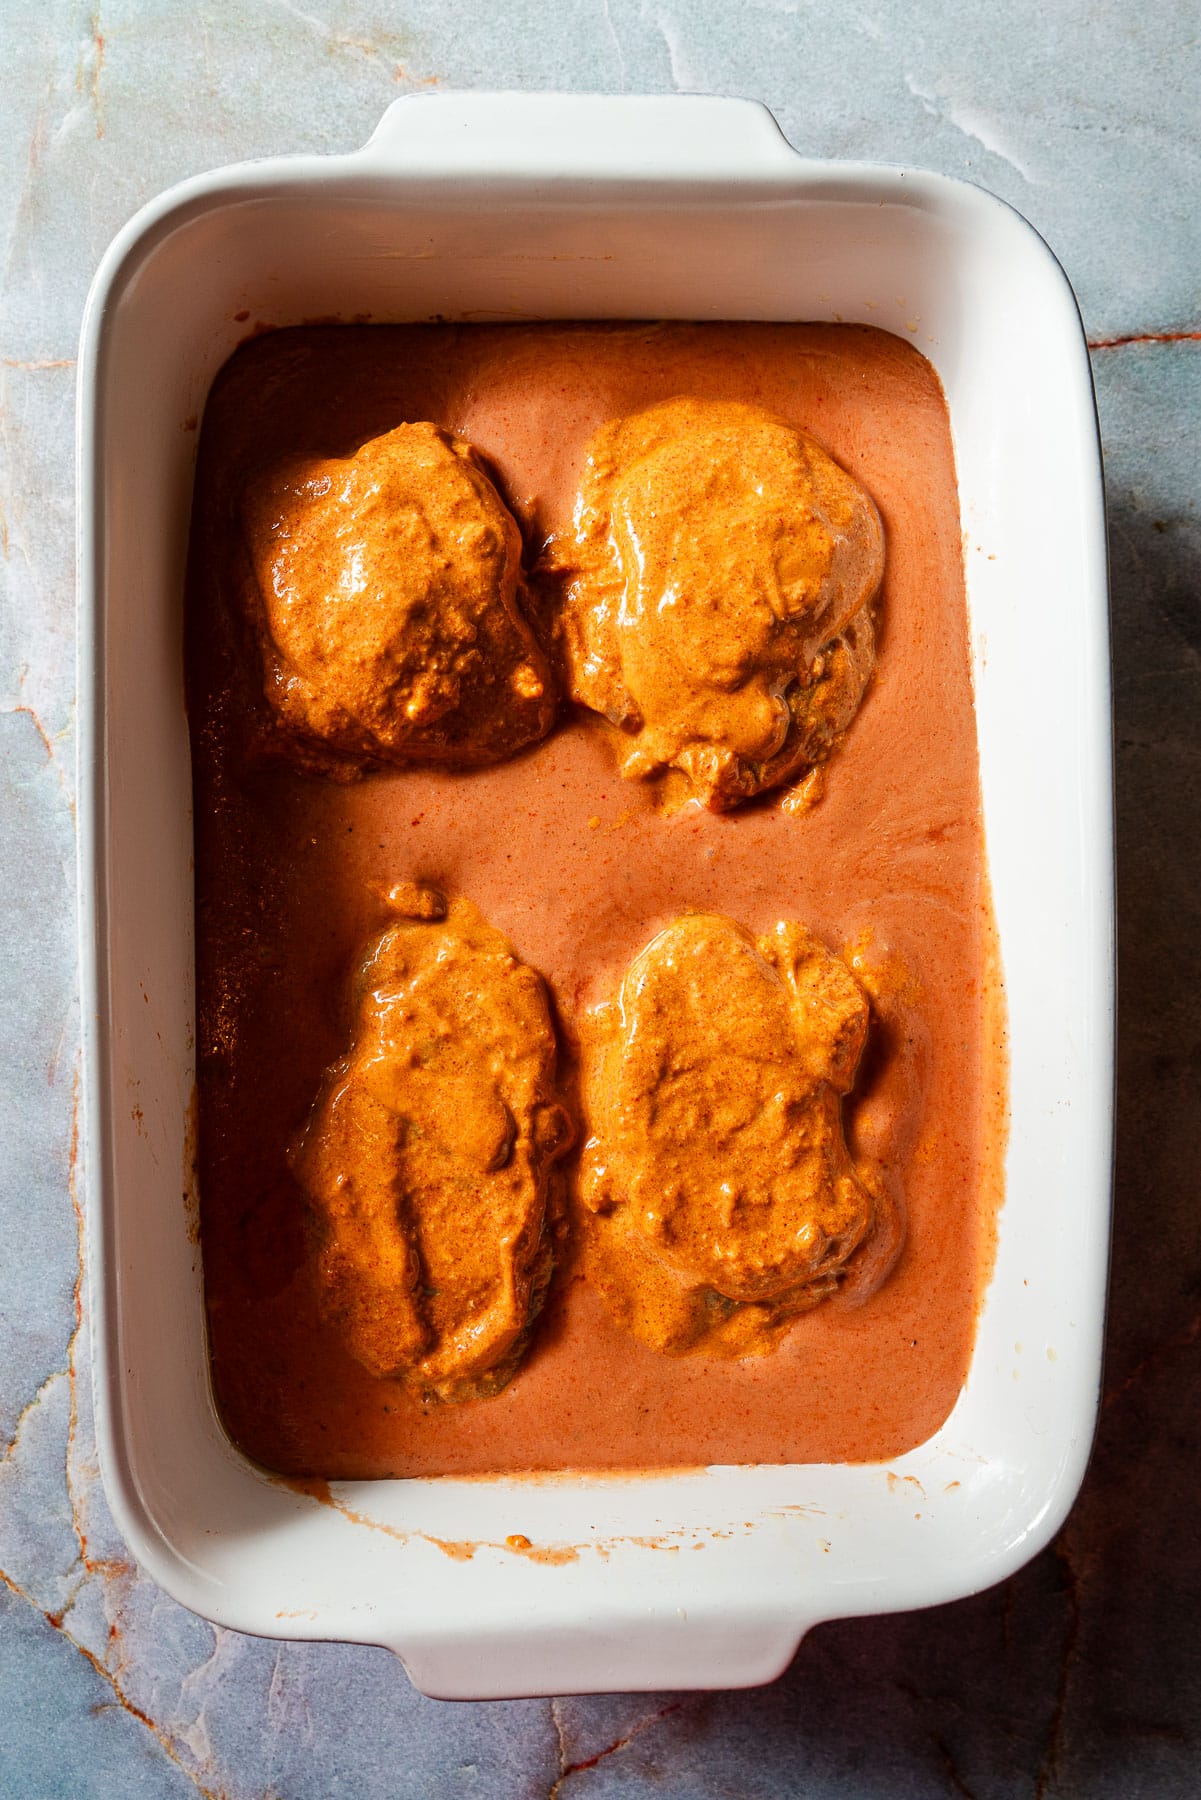 Four marinated chicken thighs in a creamy sauce unbaked in a baking dish.